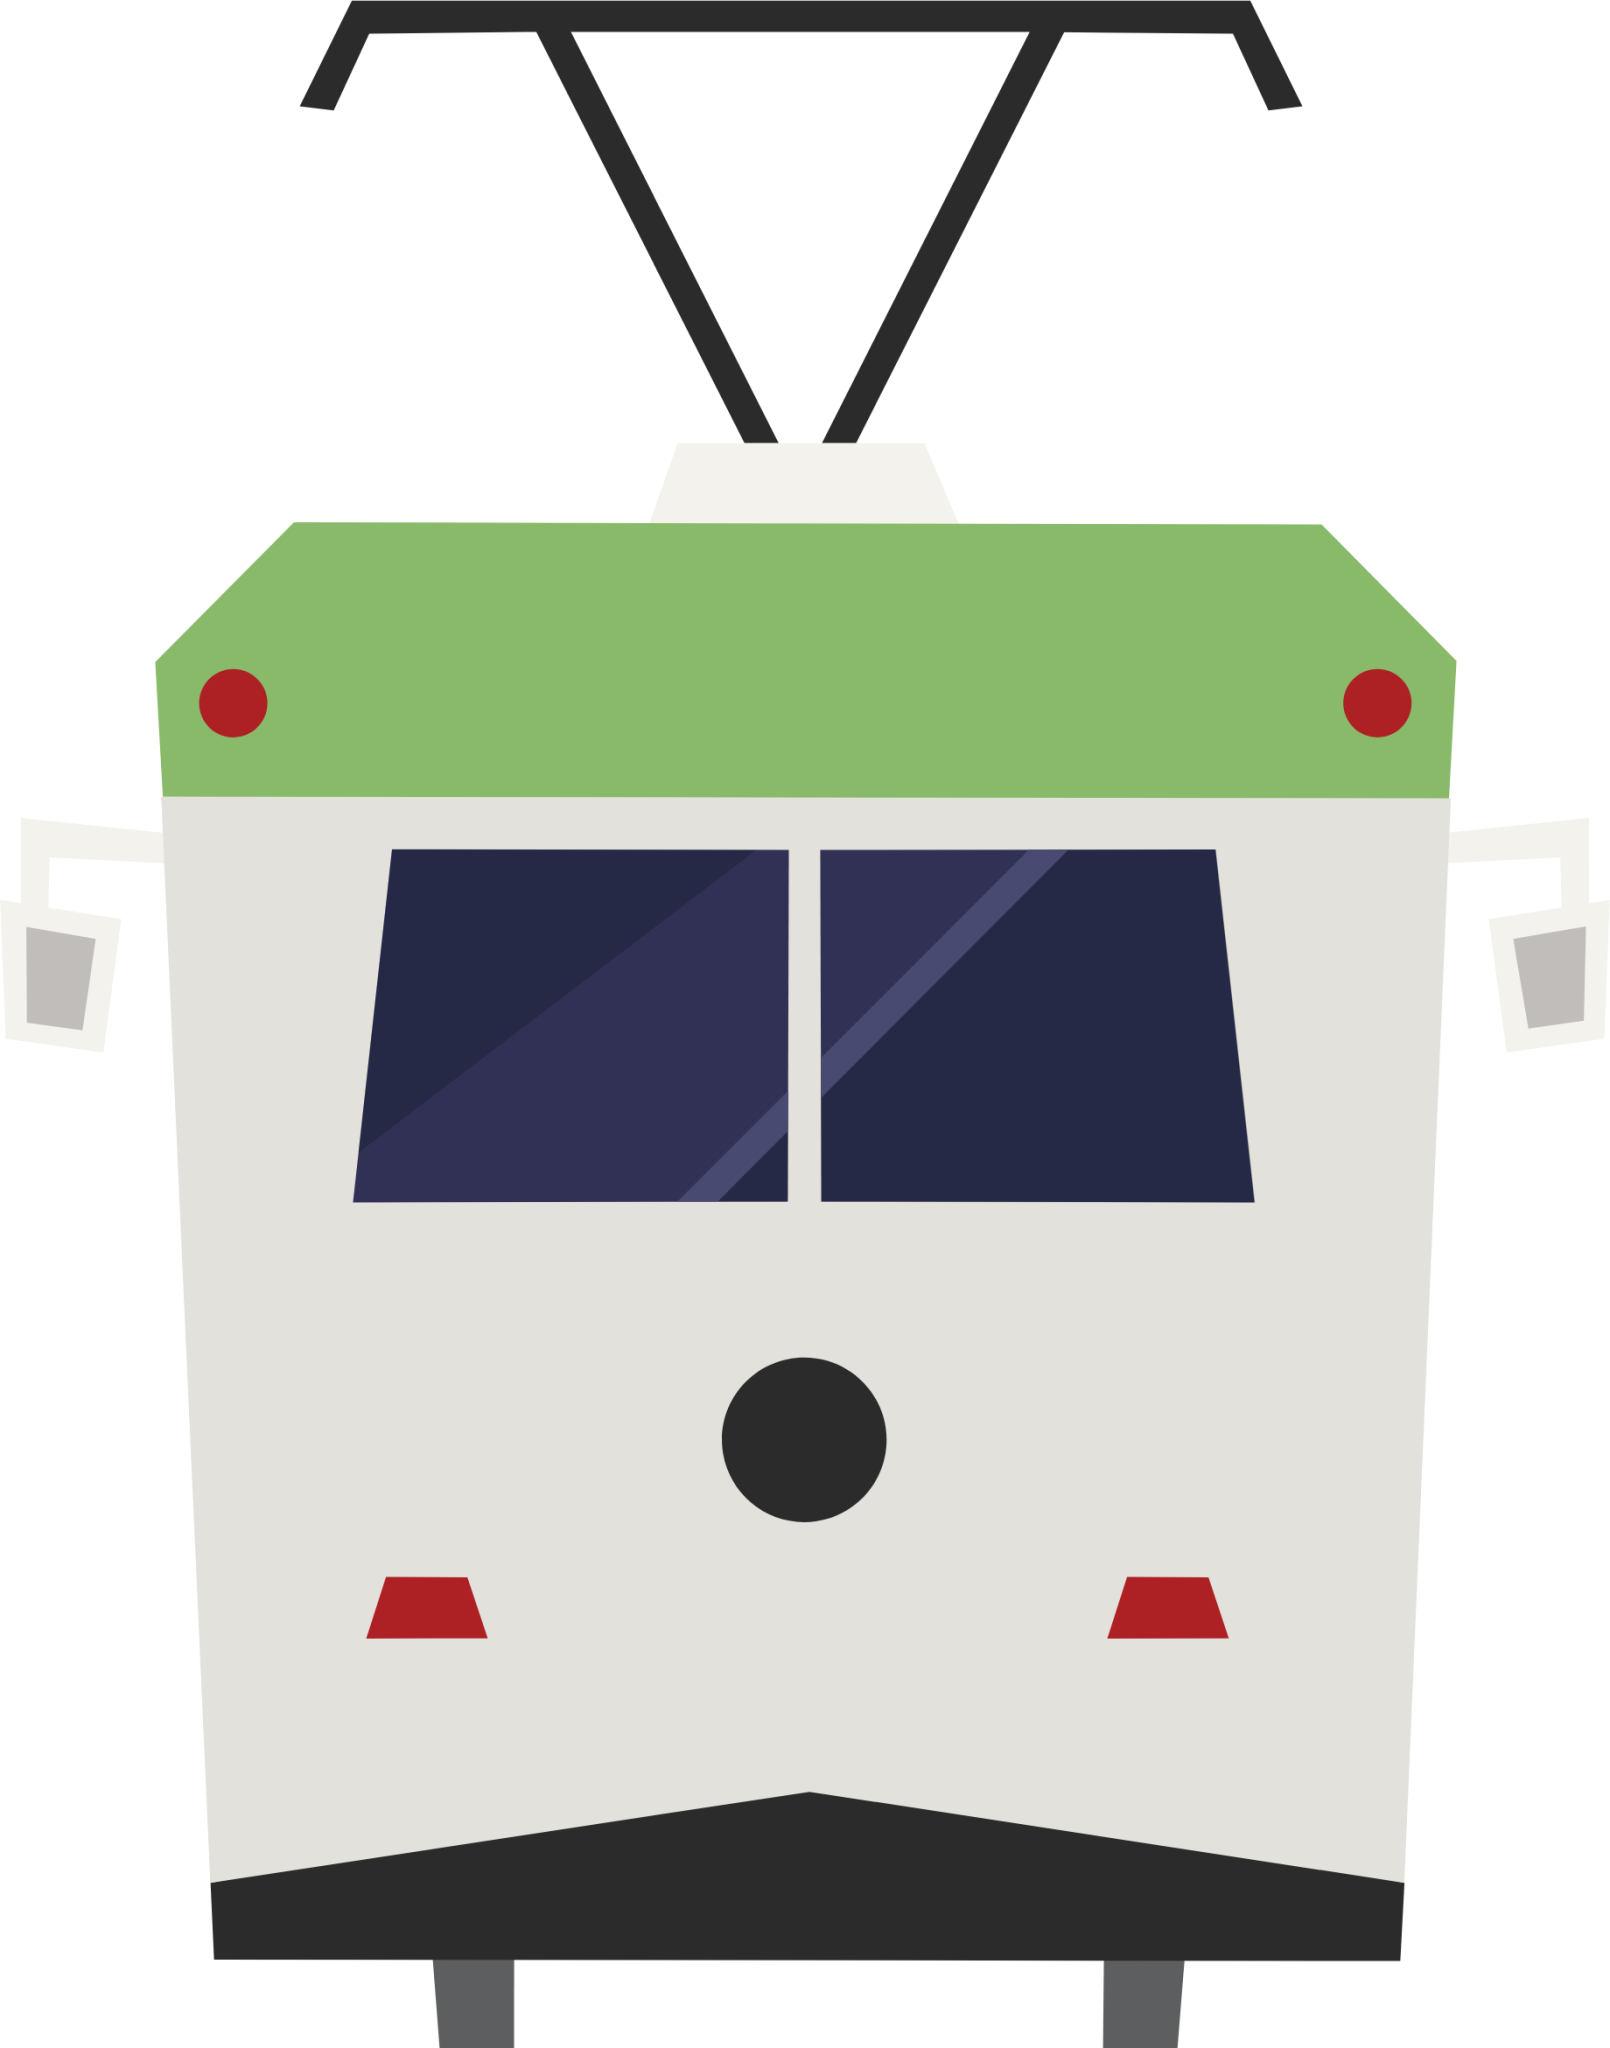 streetcar outbound illustration